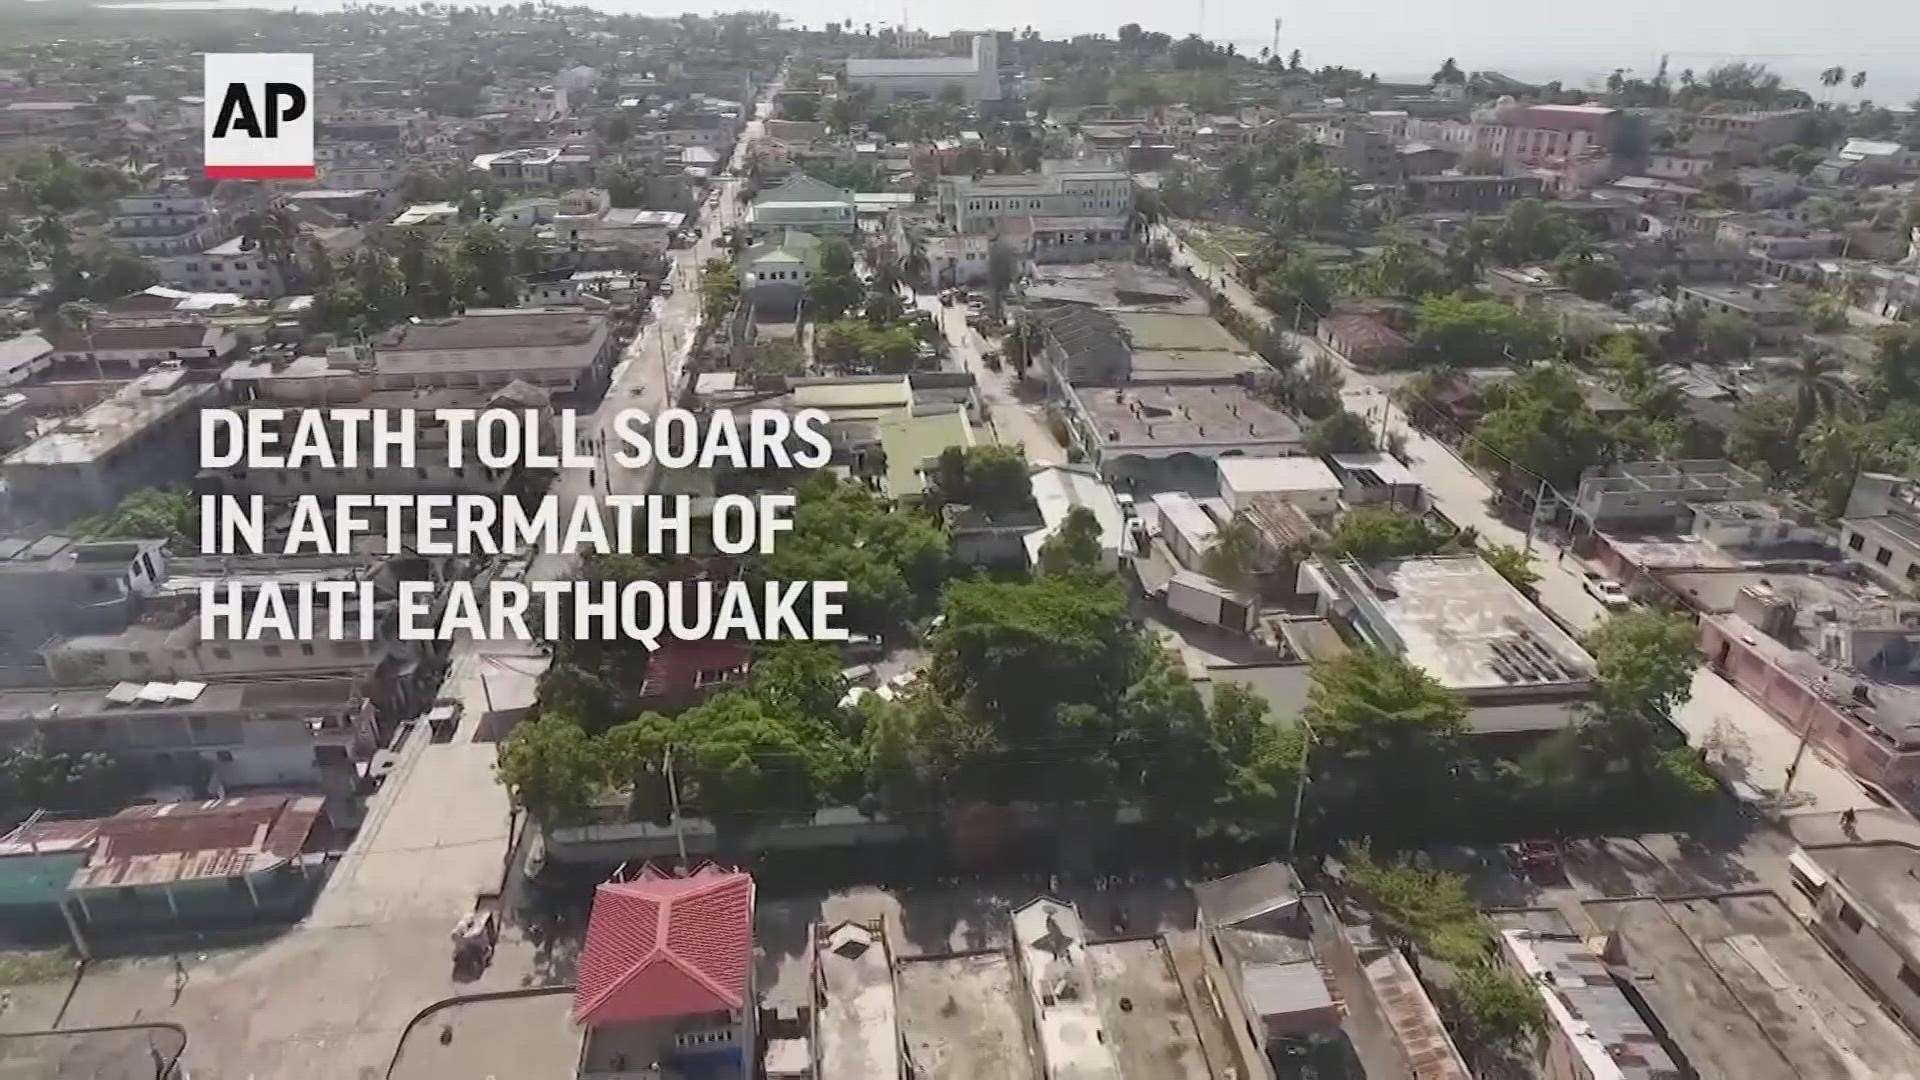 As of Sunday night, nearly 1,300 people have died as a result of an earthquake over the weekend off the coast of Haiti.